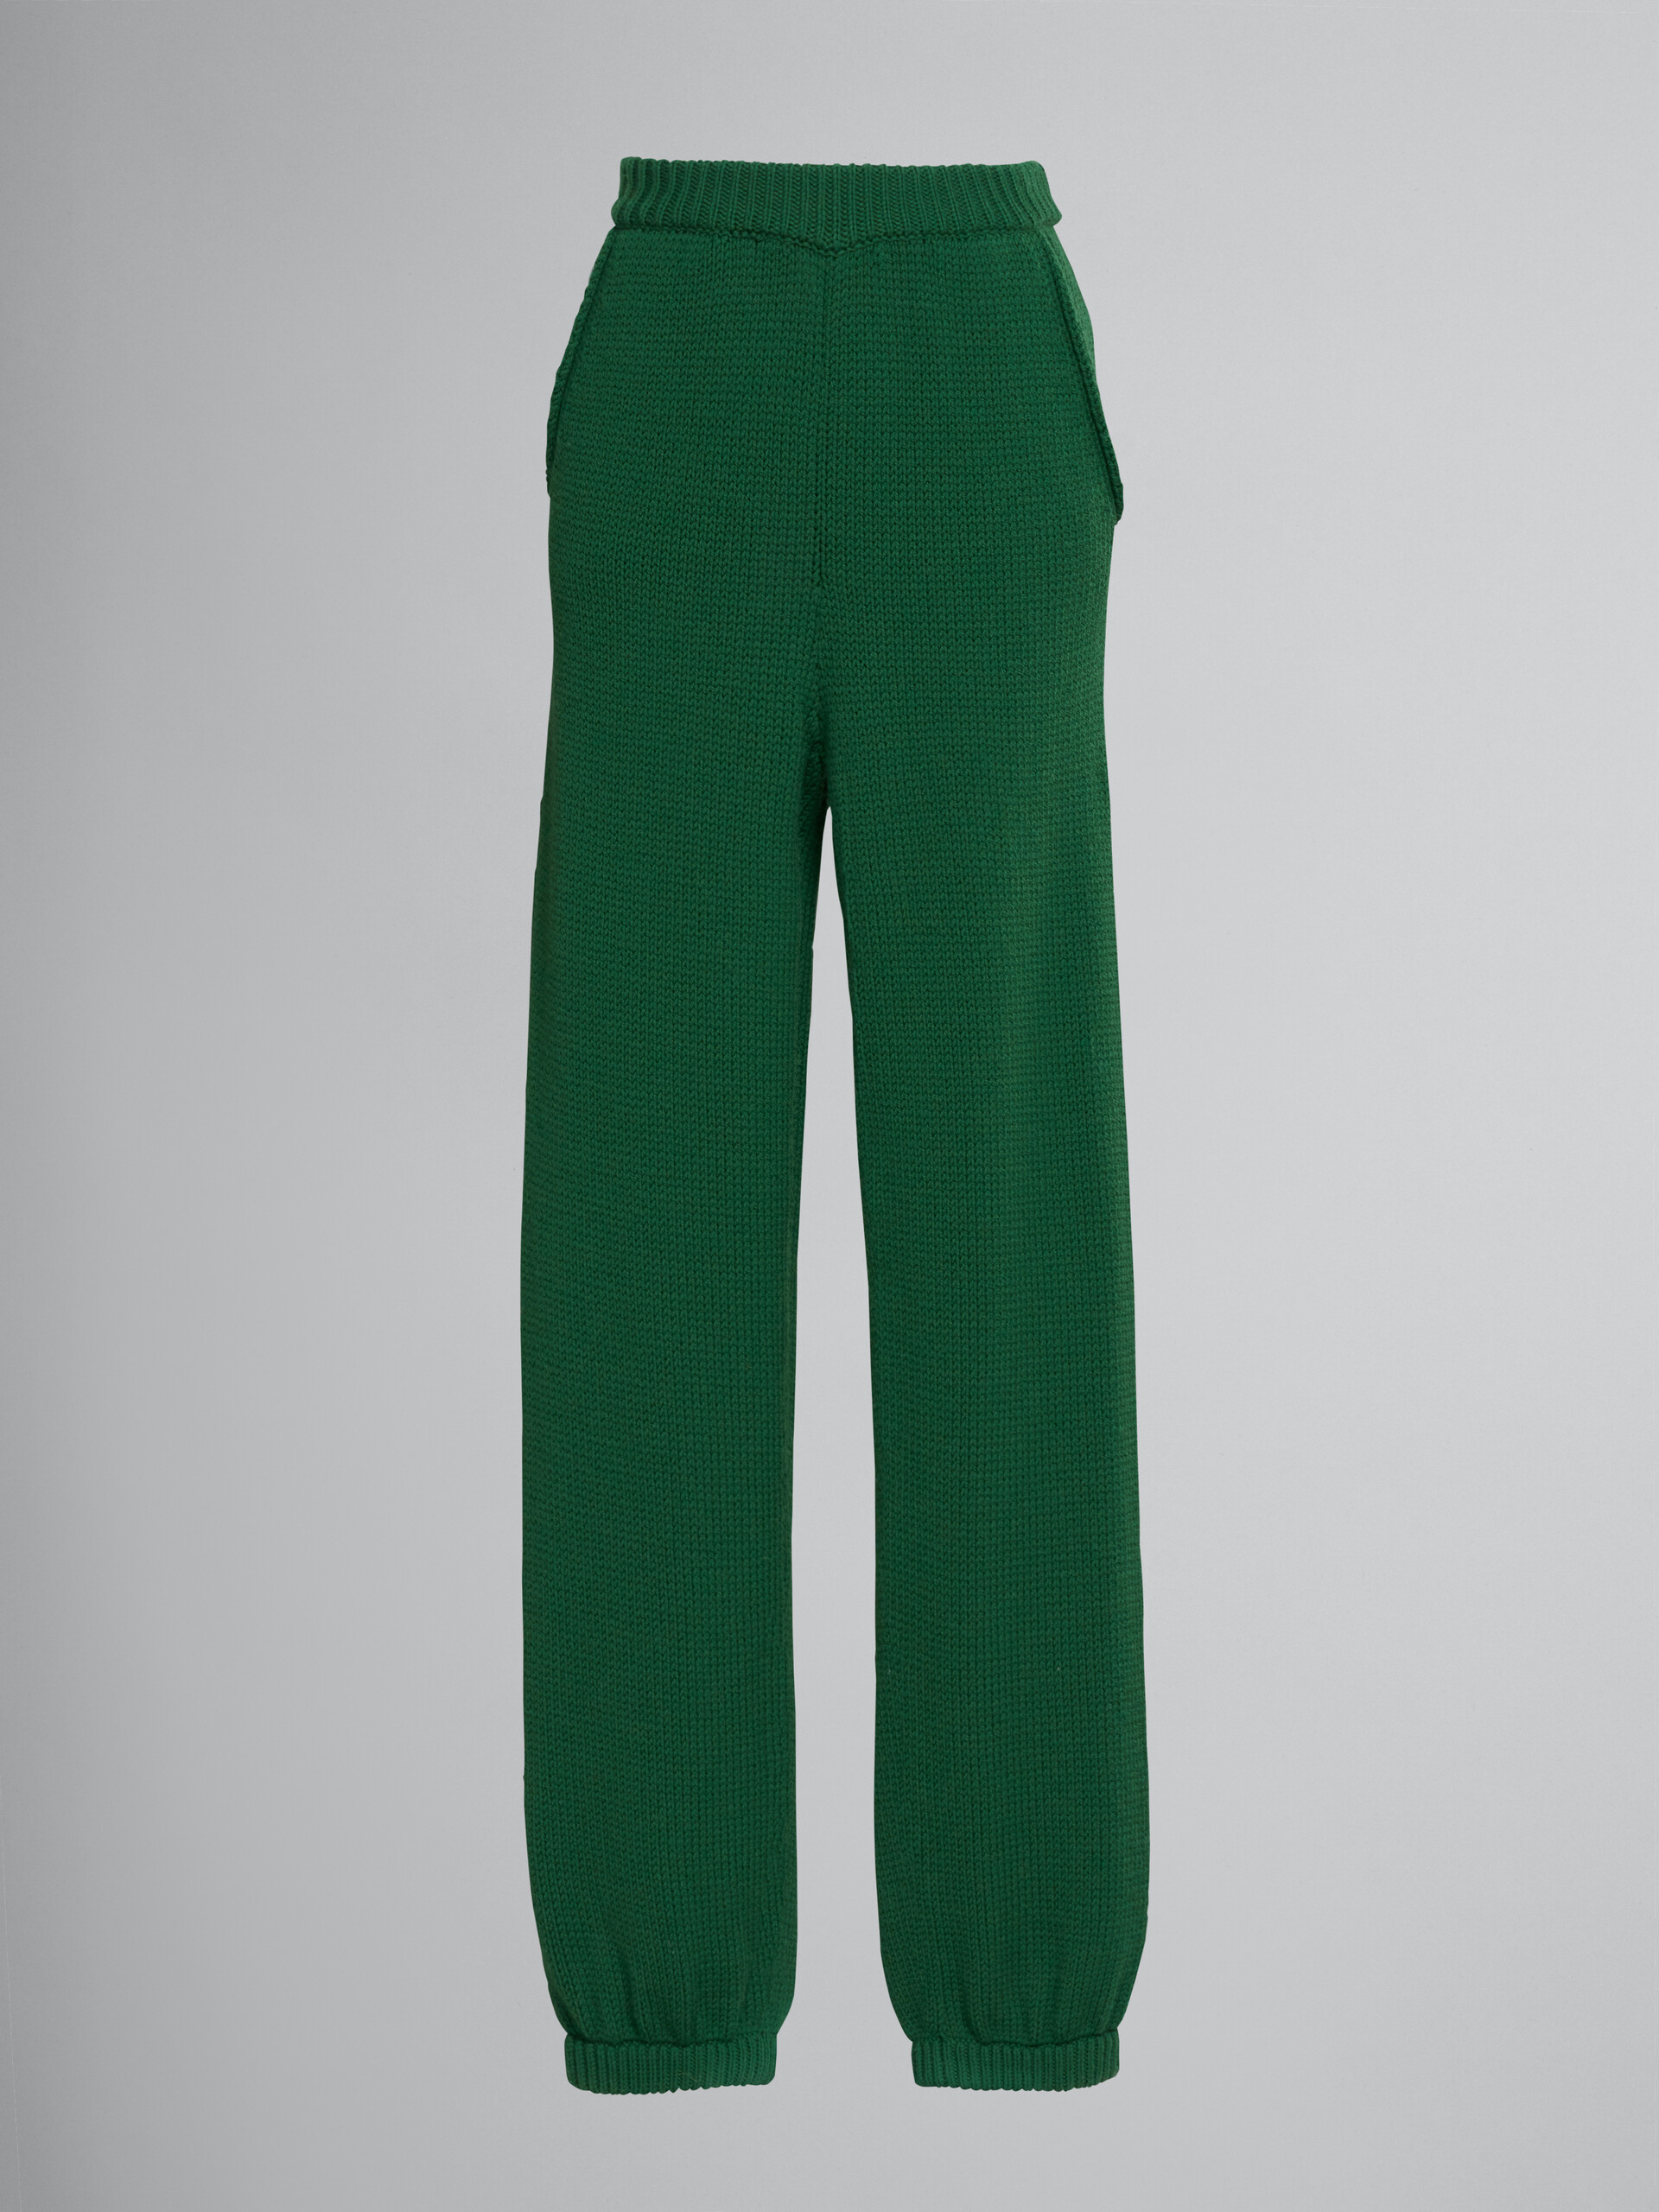 Wide trousers in green wool - Pants - Image 1